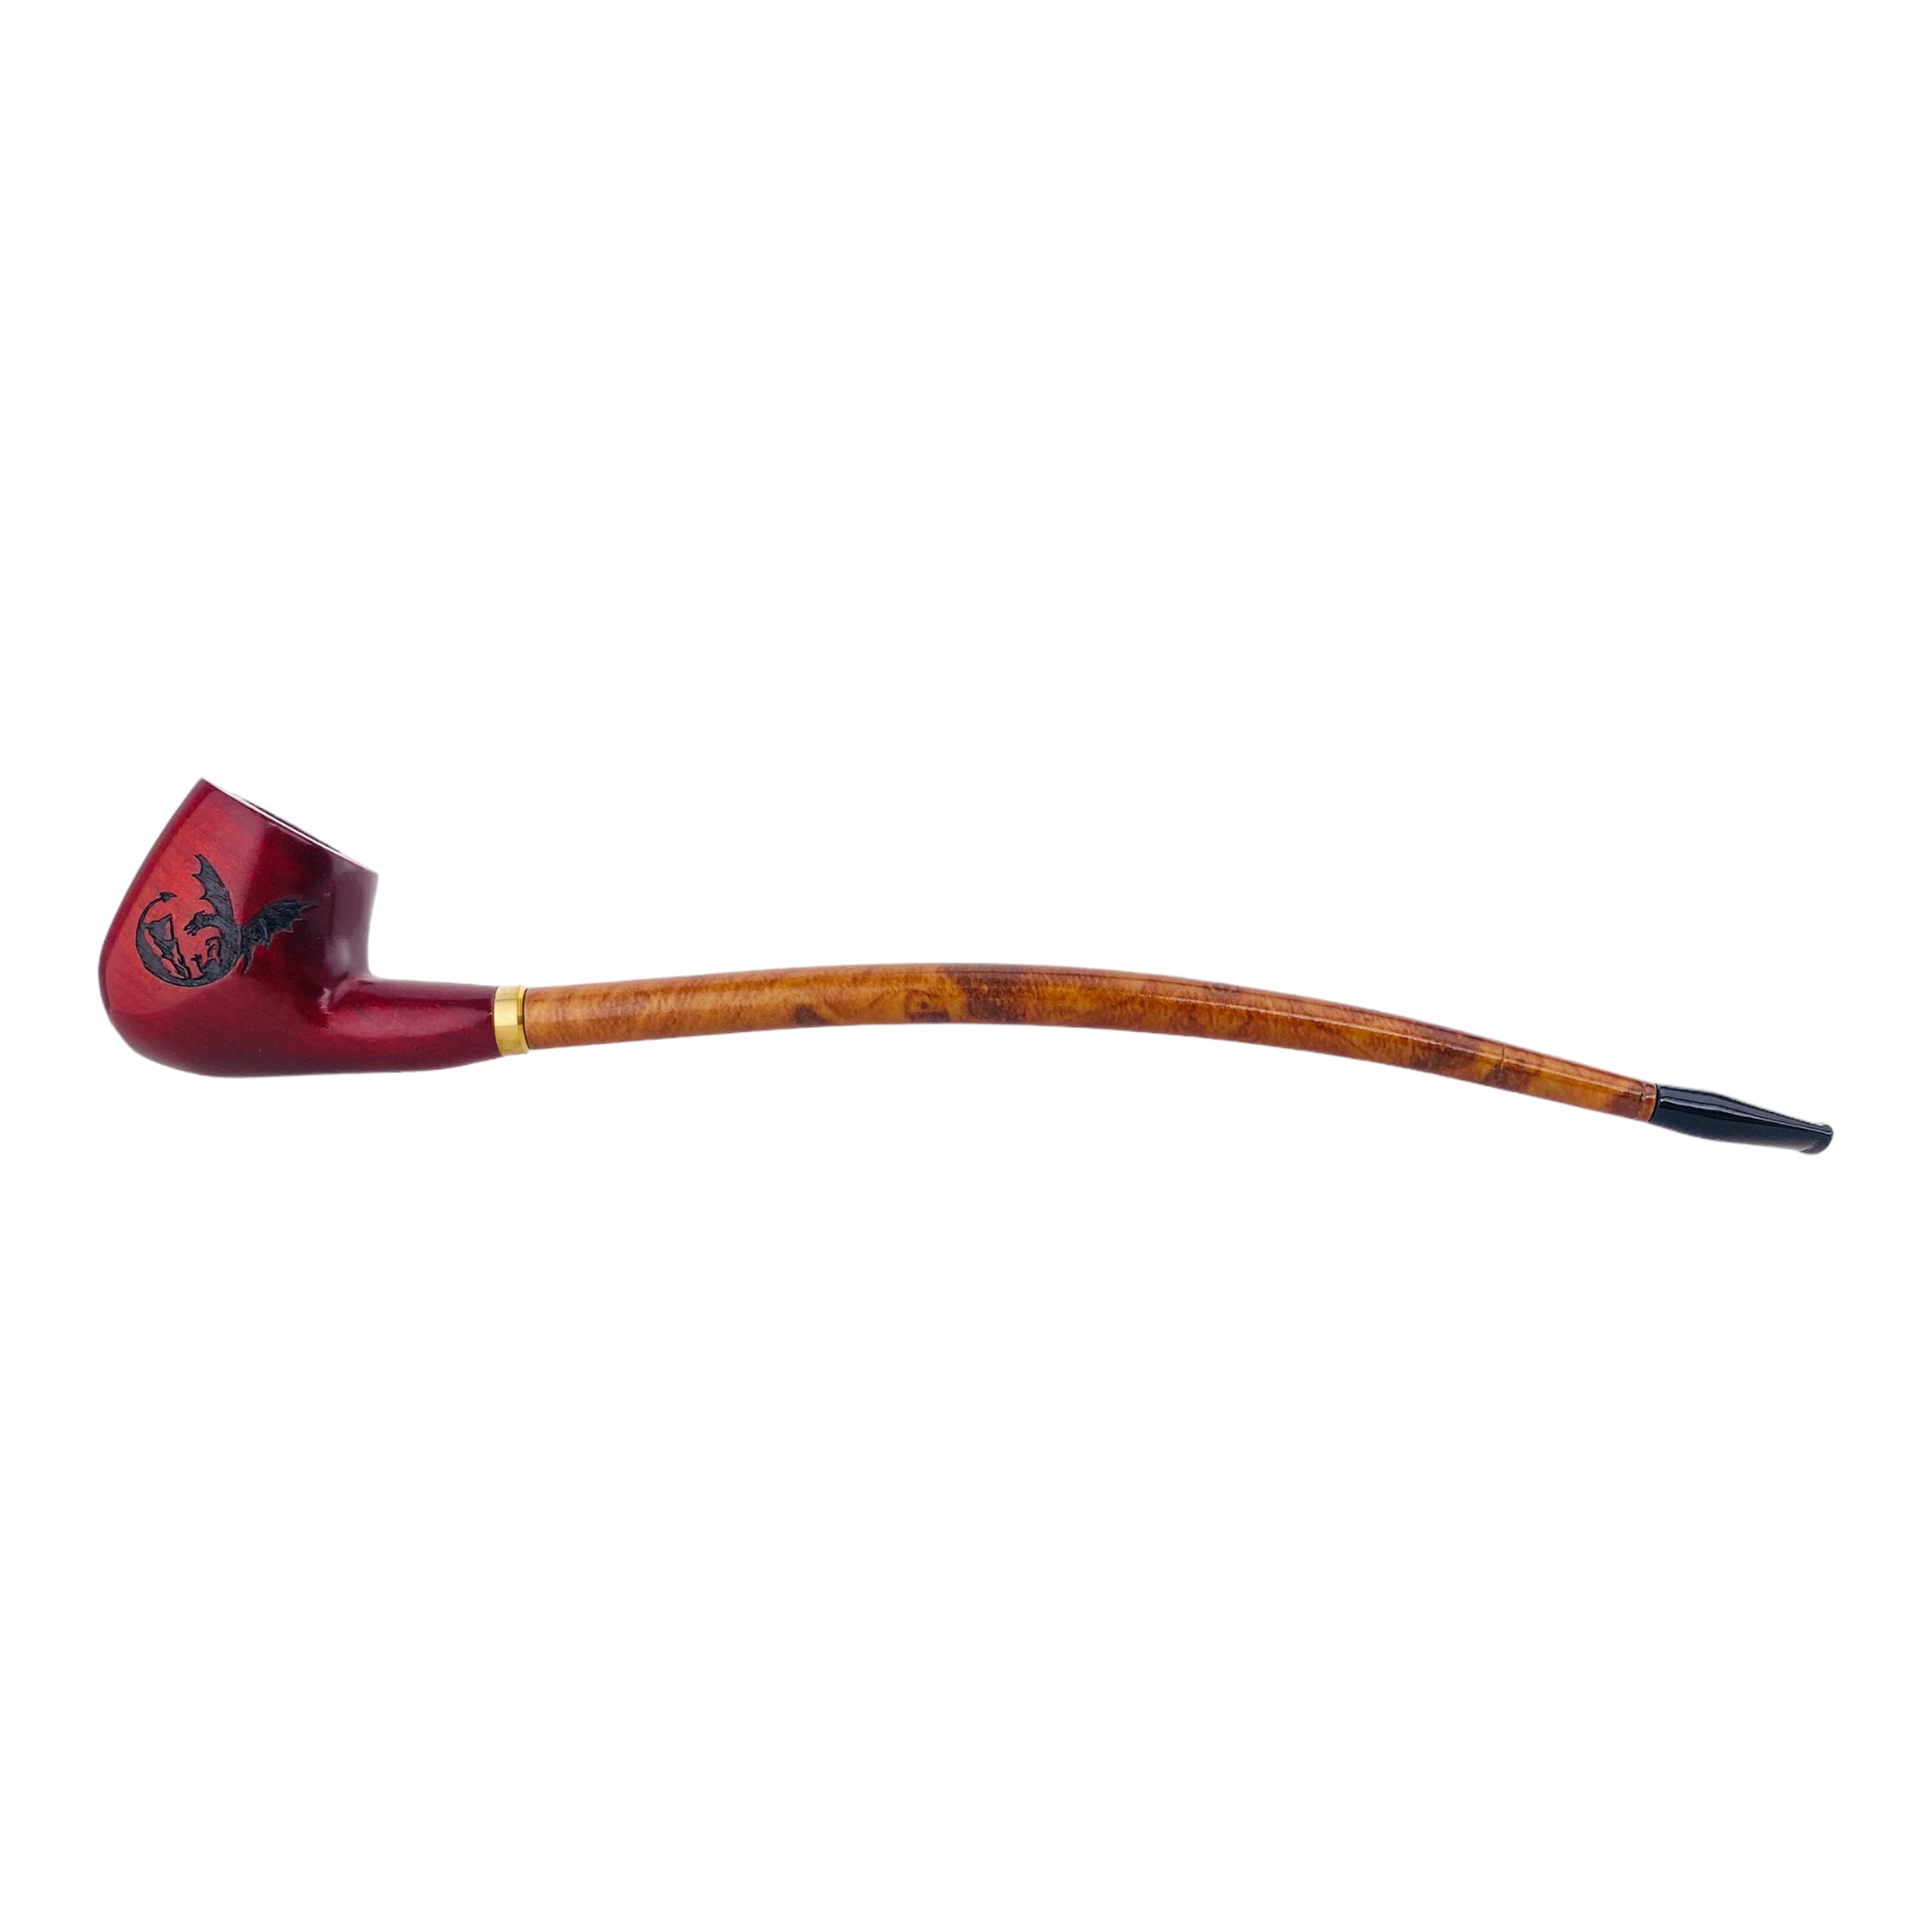 Shire Pipes - The Lord Of The Rings - Smaug Smoking Pipe